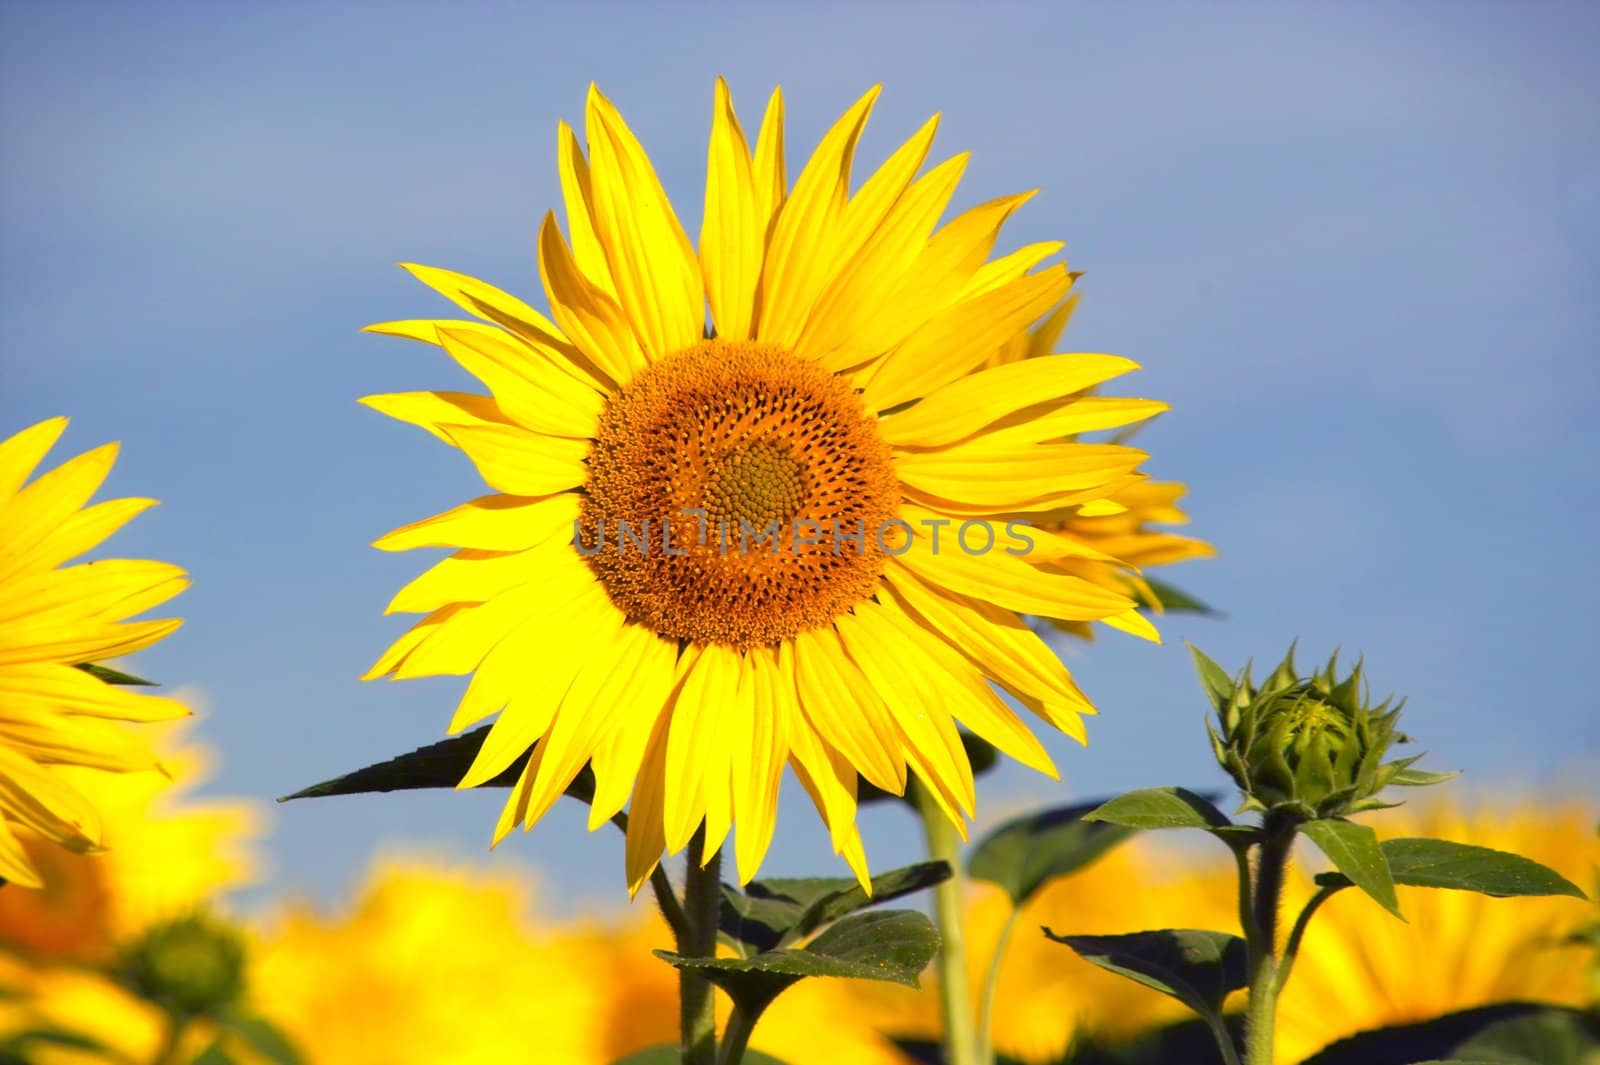 a picture of sunflowers and a blue sky